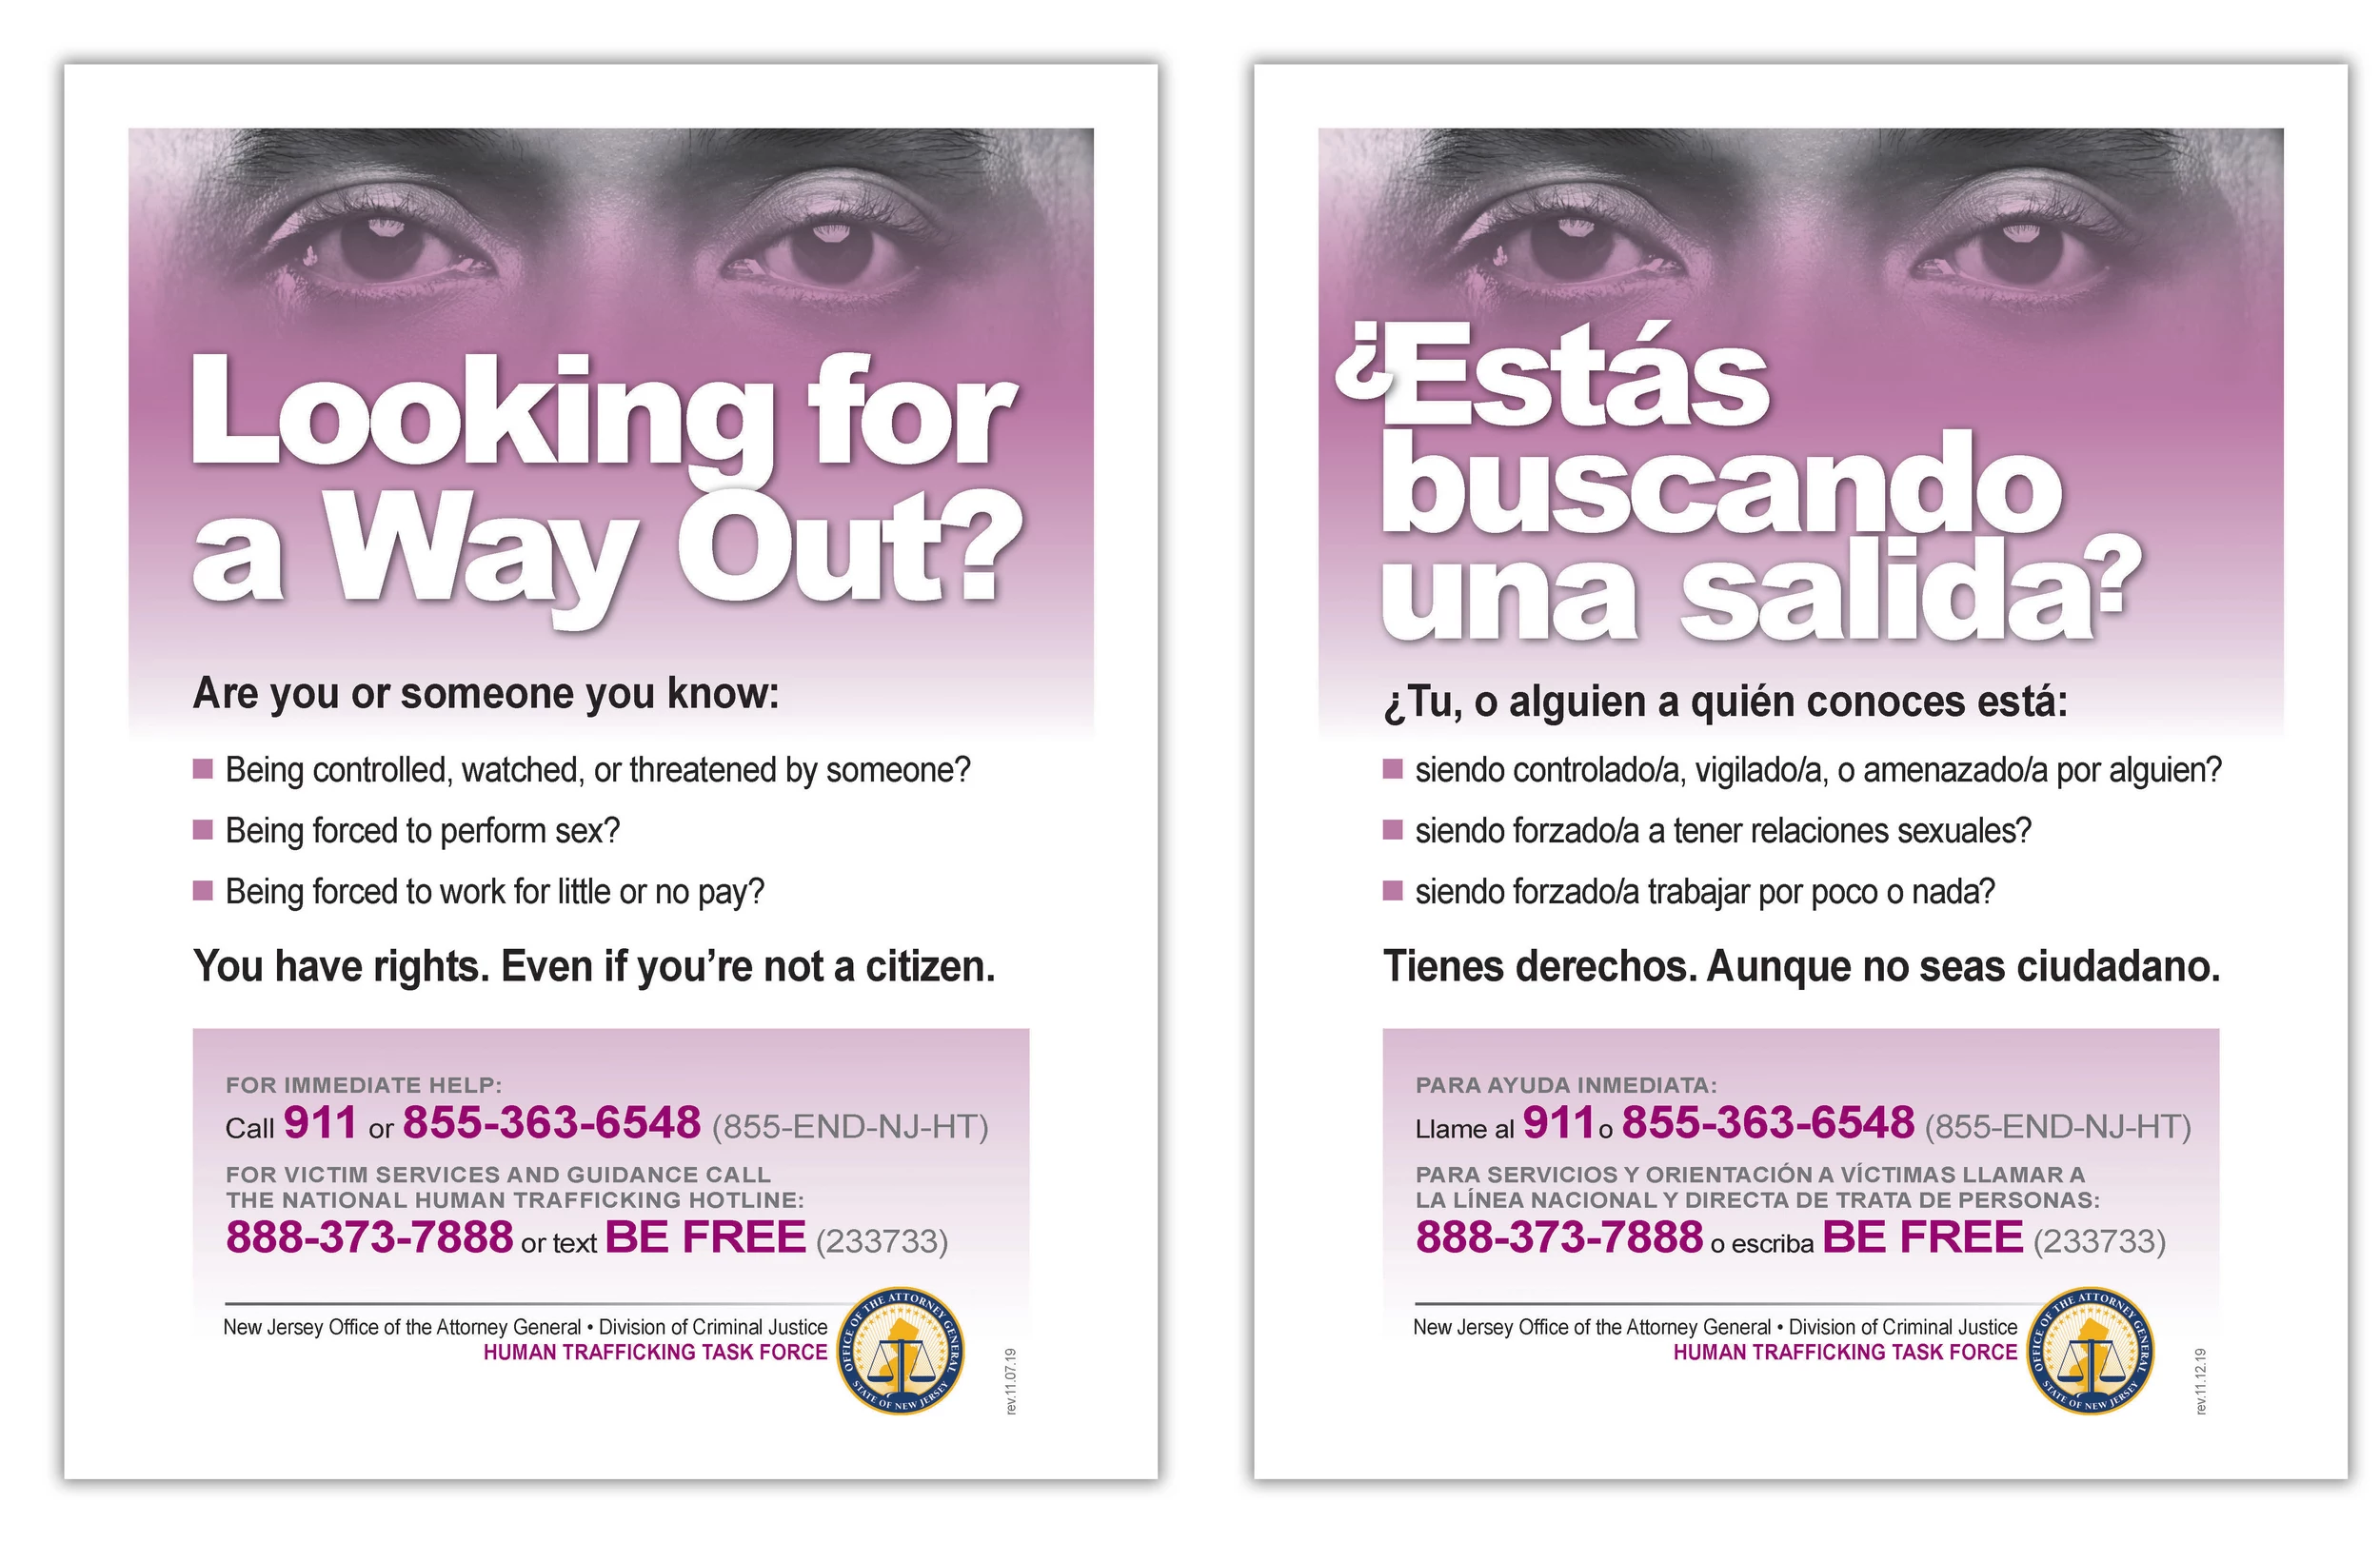 Posters at NJ rest stop restrooms target human trafficking